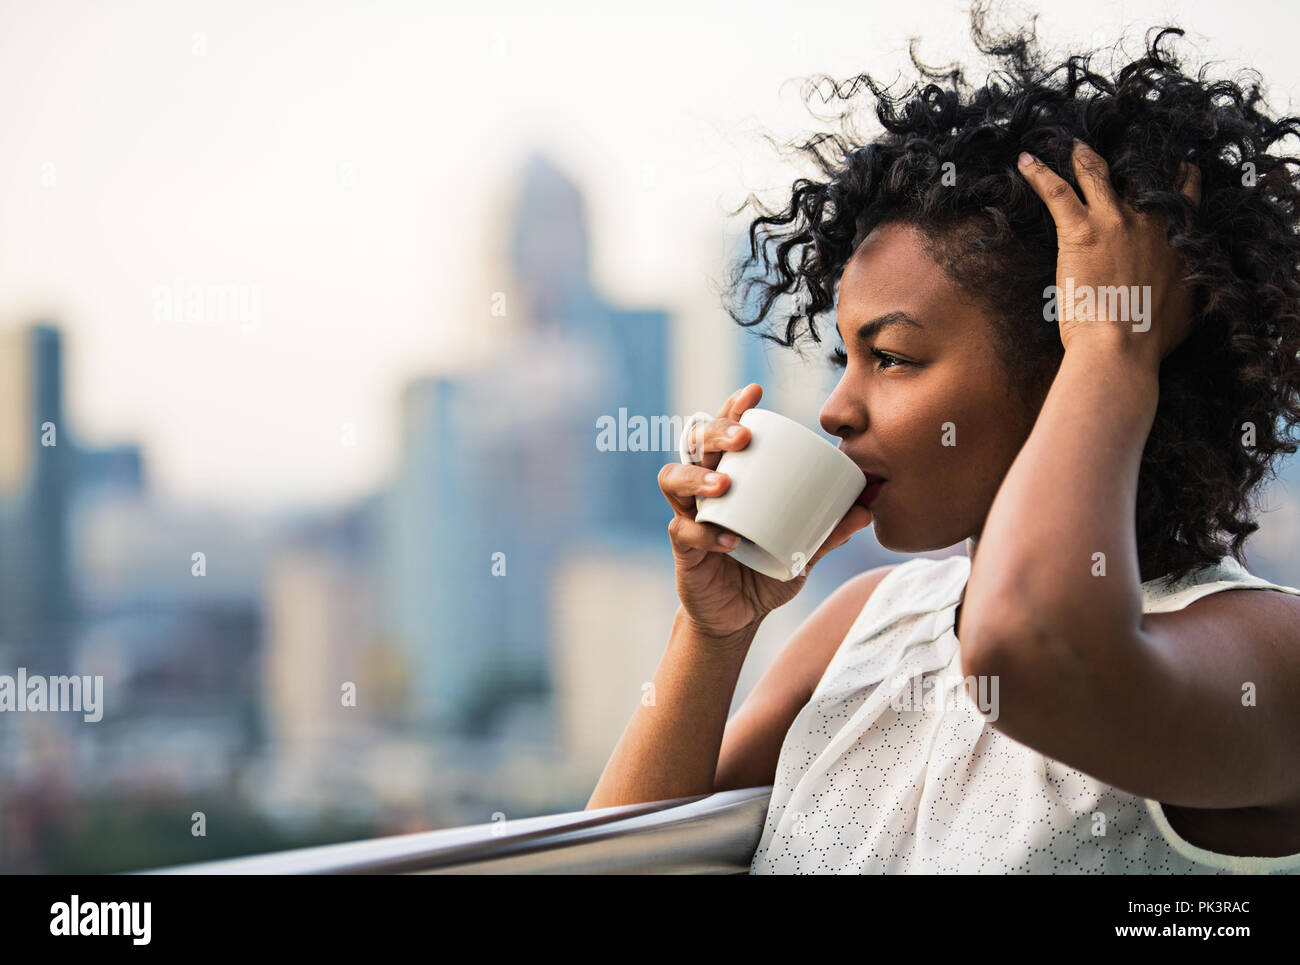 A close-up portrait of a woman standing on a terrace, drinking coffee. Stock Photo